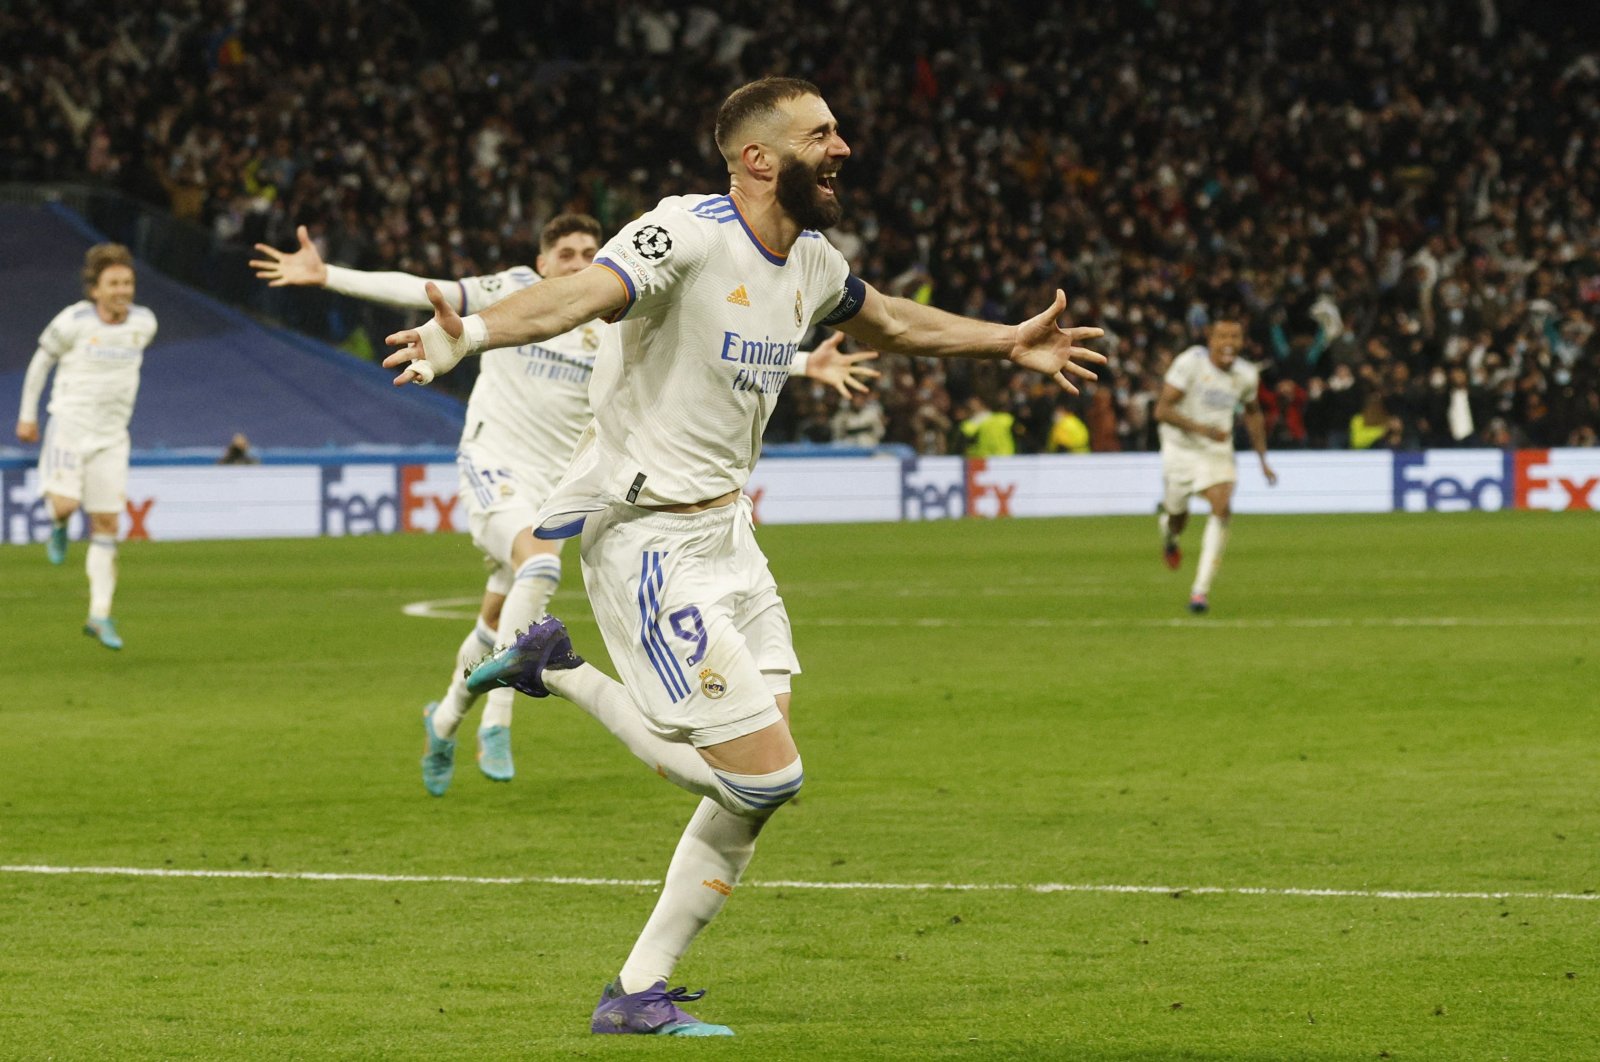 Real Madrid&#039;s Karim Benzema celebrates scoring their third goal during the Champions League Round of 16 Second Leg match against Paris St Germain at Santiago Bernabeu, Madrid, Spain on Mar. 9, 2022 (Reuters Photo)